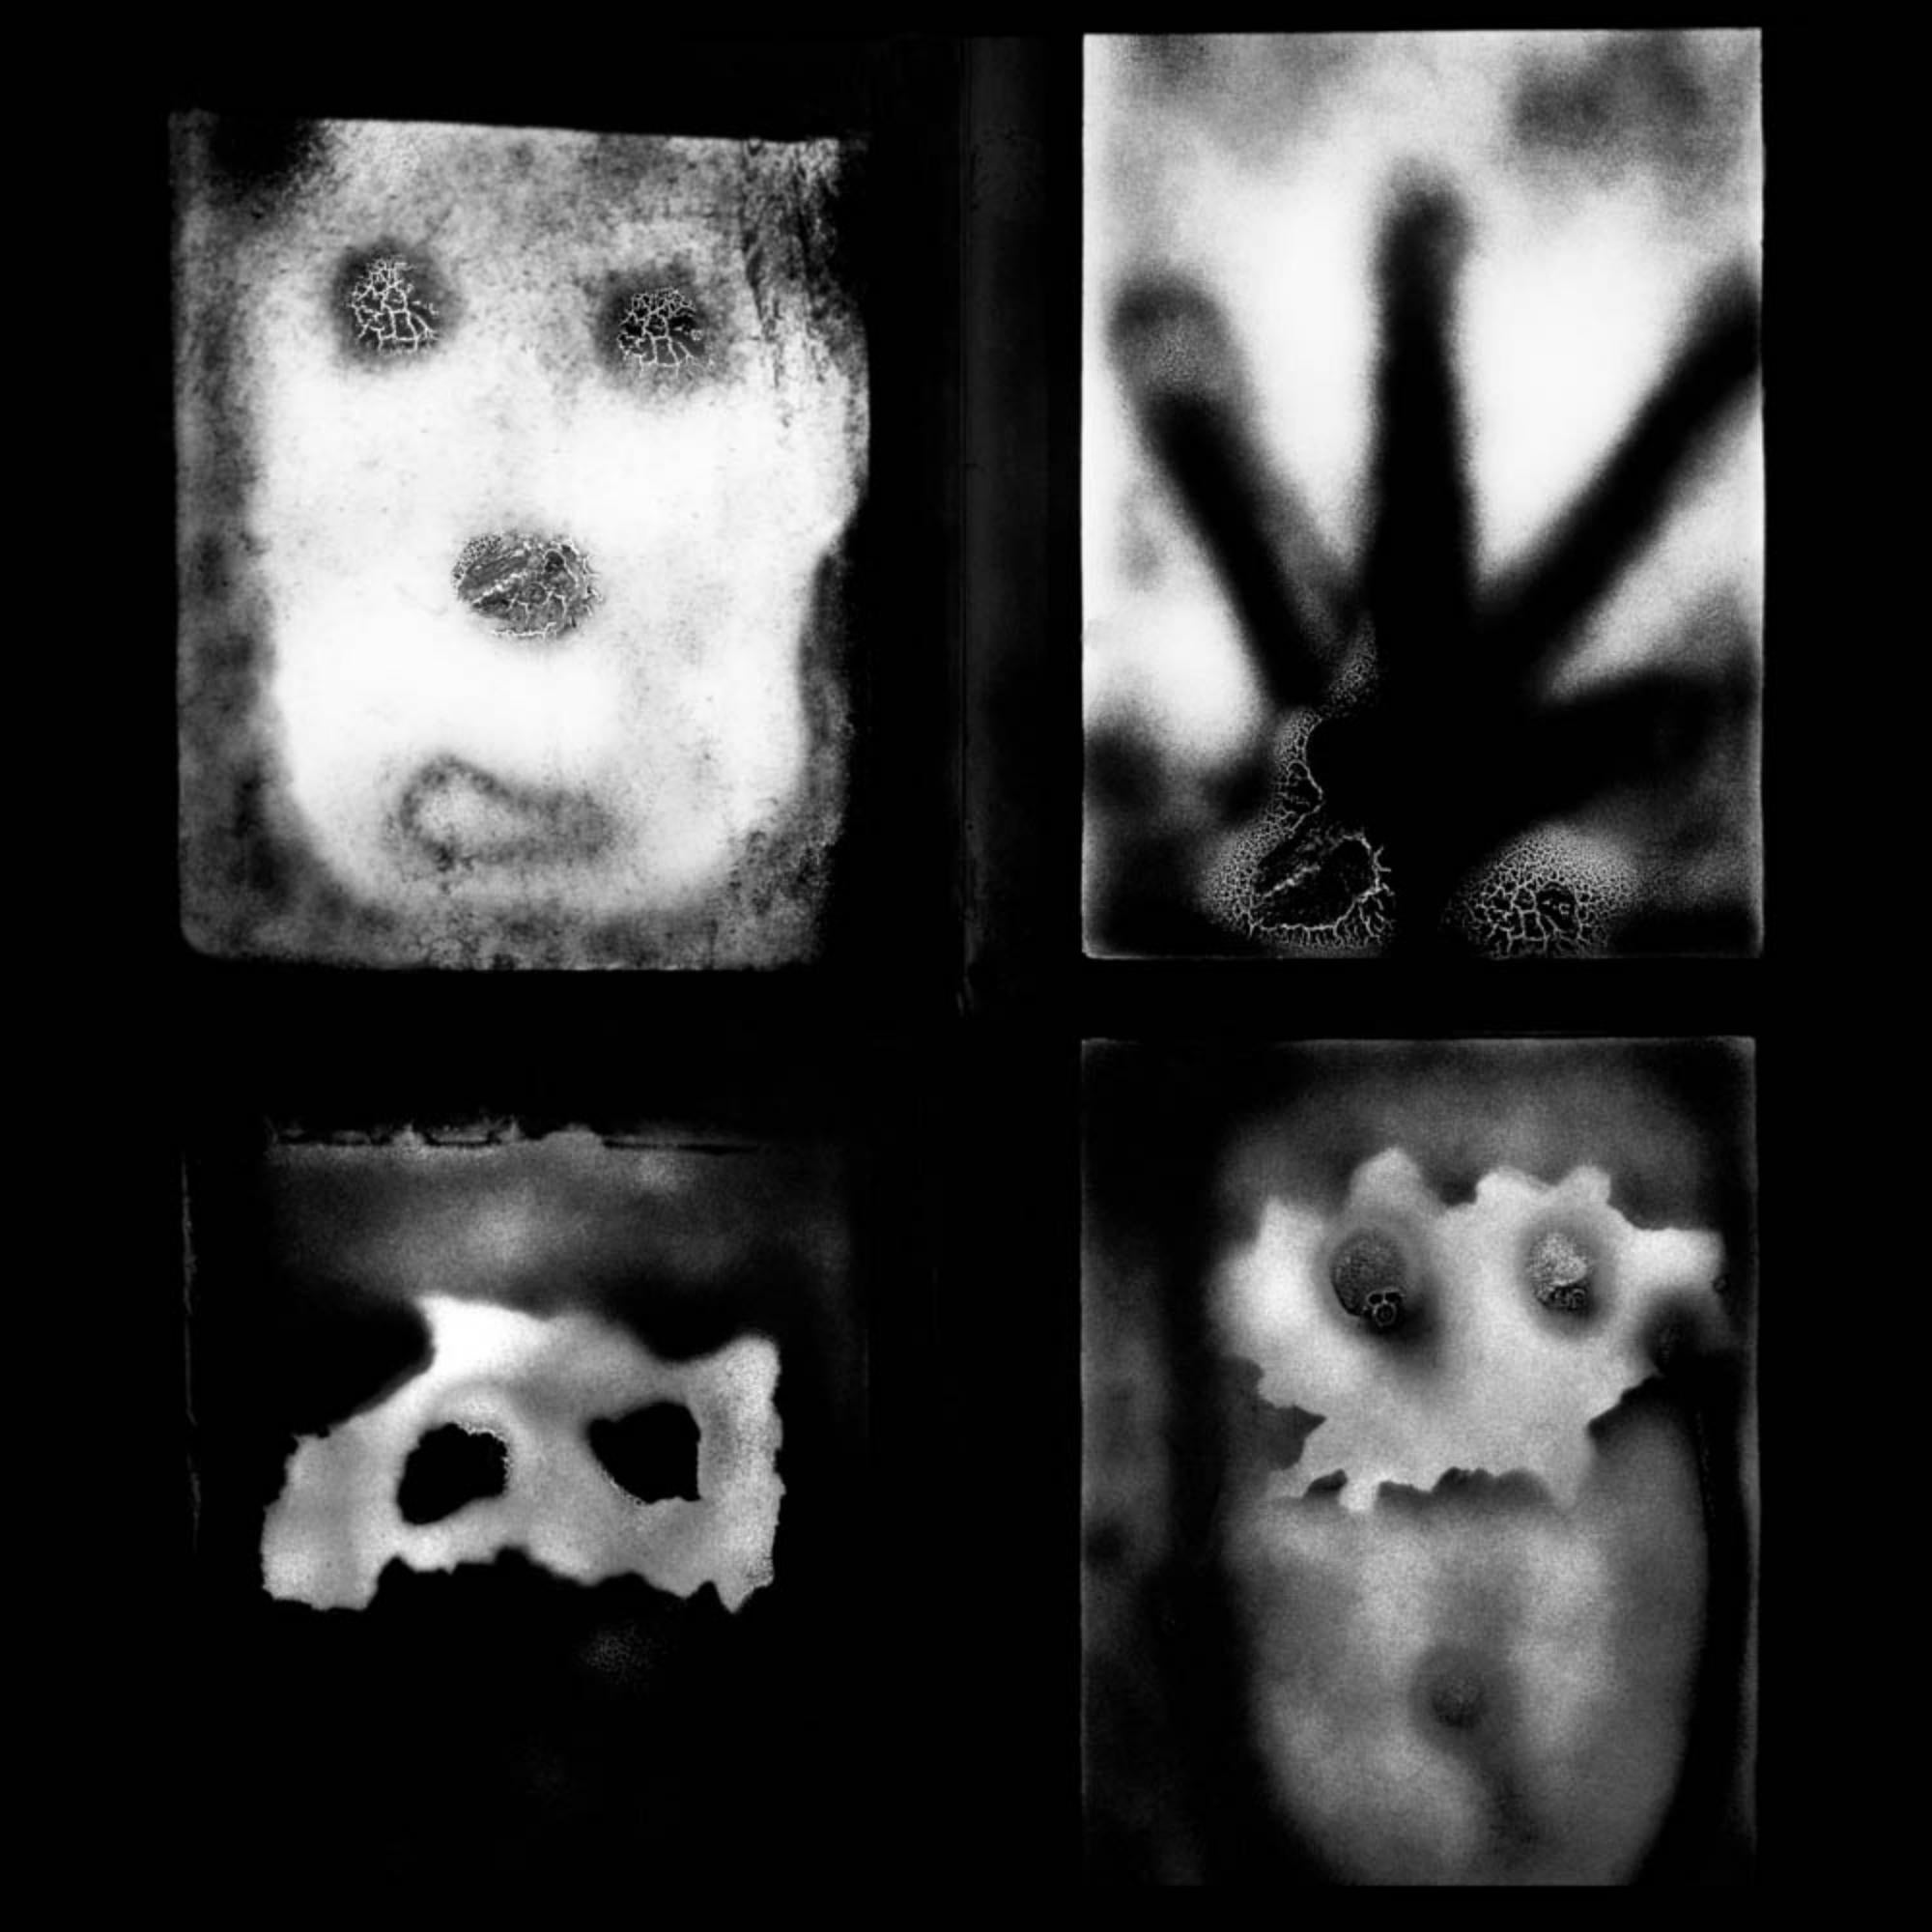 Roger Ballen
Manifestation, from the series 'The Theatre of Apparitions', 2007
One sided Texflex Lightbox, Powder coated Ferro Black
Lightbox 100 x 100 x 9 cm (39 3/8 x 39 3/8 x 3 1/2 in.)
Edition of 3 (#1/3)

All lightboxes can also be purchased as